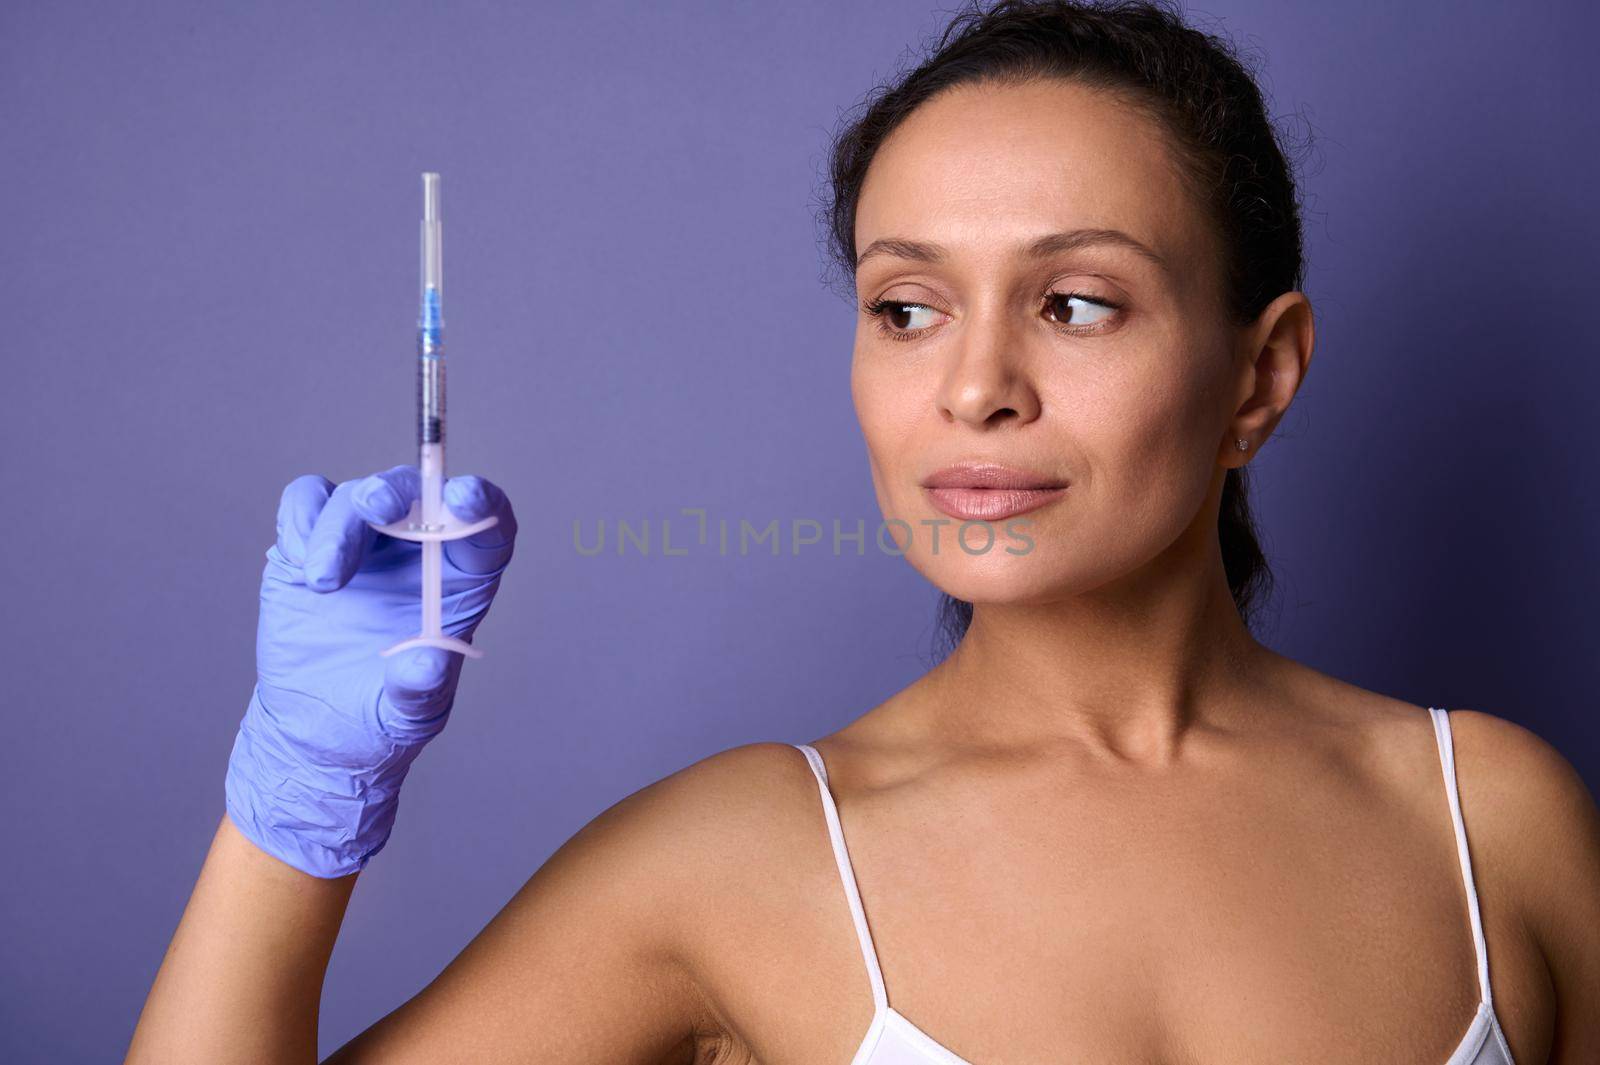 Natural beauty woman holding a syringe with rejuvenating injection in her hand, isolated on purple background with copy ad space. Cosmetology, aesthetic wellness spa concept. Healthcare and medicine